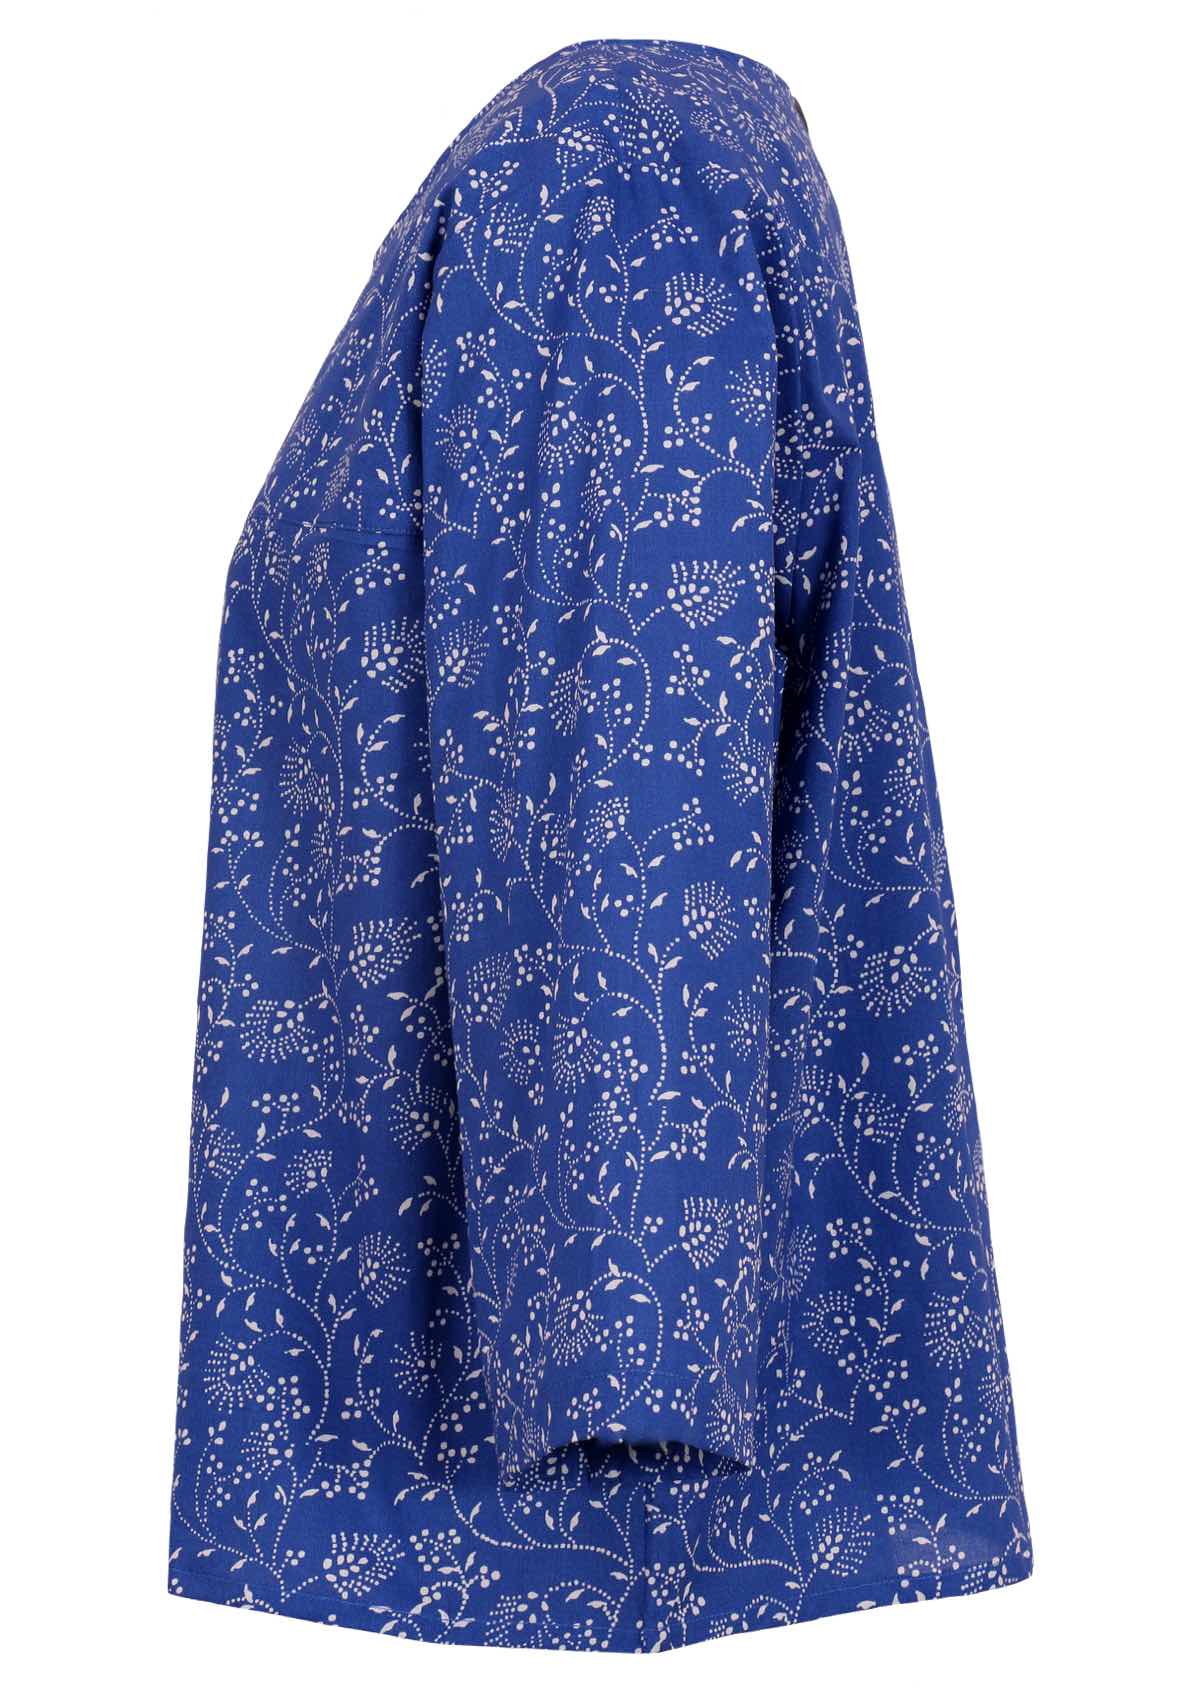 Blue floral top has a loose fit and round neckline. 